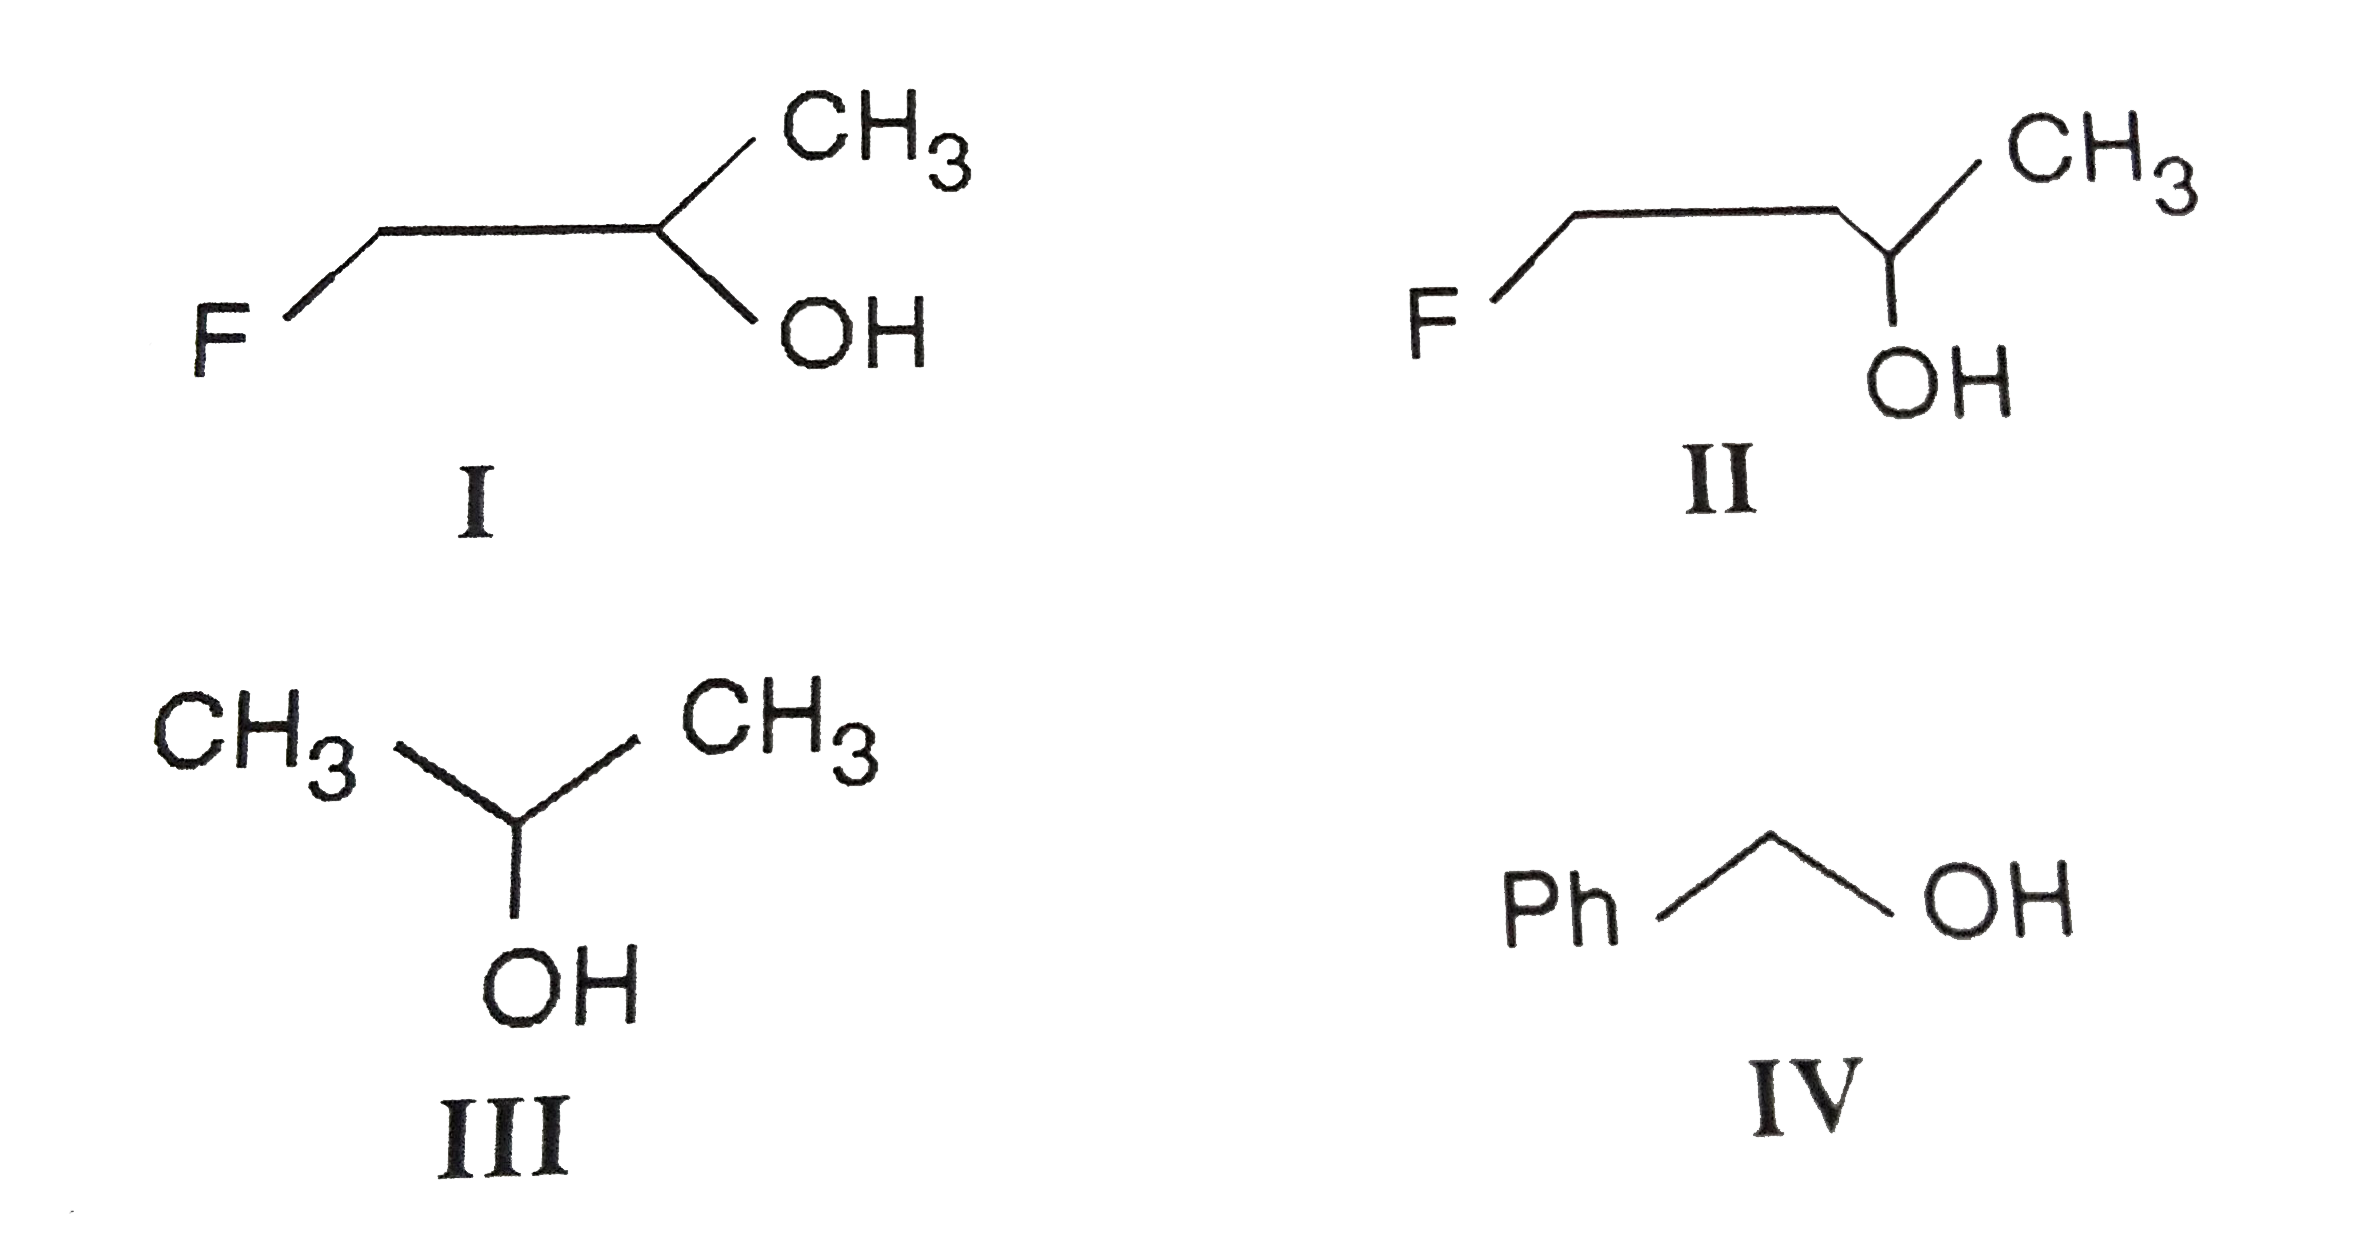 The order of reactivity of the followin alcohols towards conc. HCl is